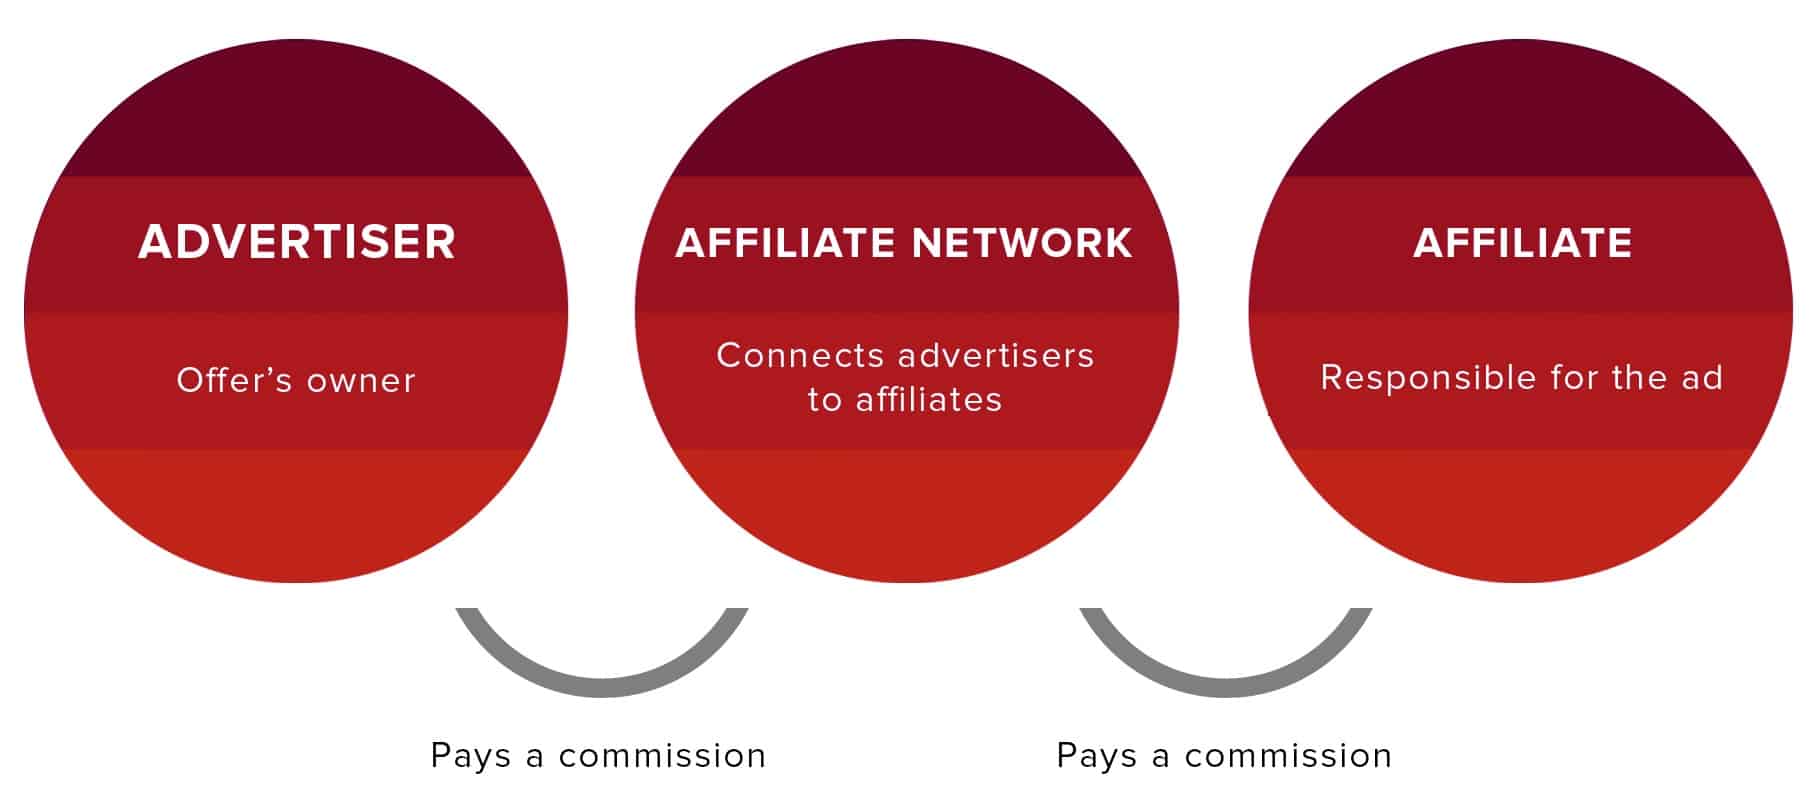 5 reasons to start an affiliate marketing business in 2021